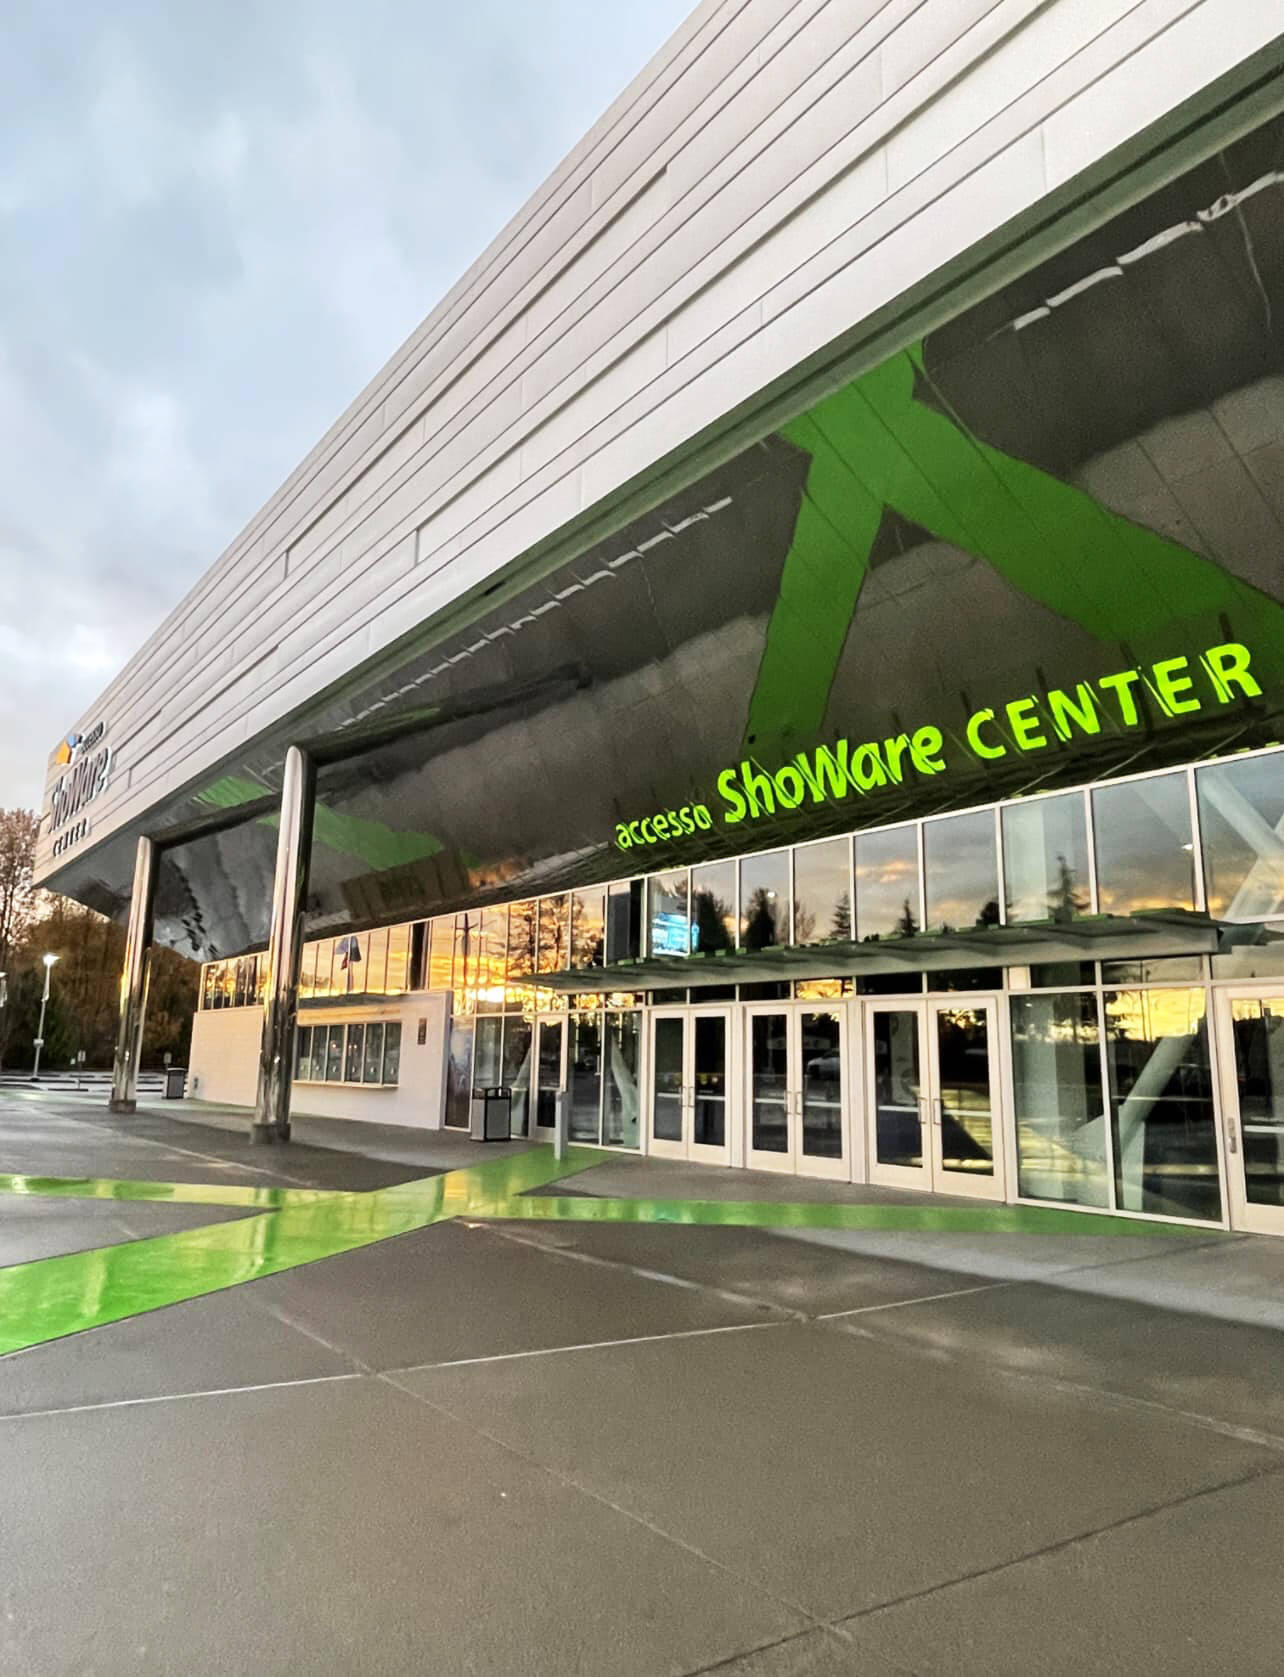 The city-owned accesso ShoWare Center had operating losses of $744,191 in 2022 and could face losses of nearly $1 million in 2023. COURTESY PHOTO, ShoWare Center